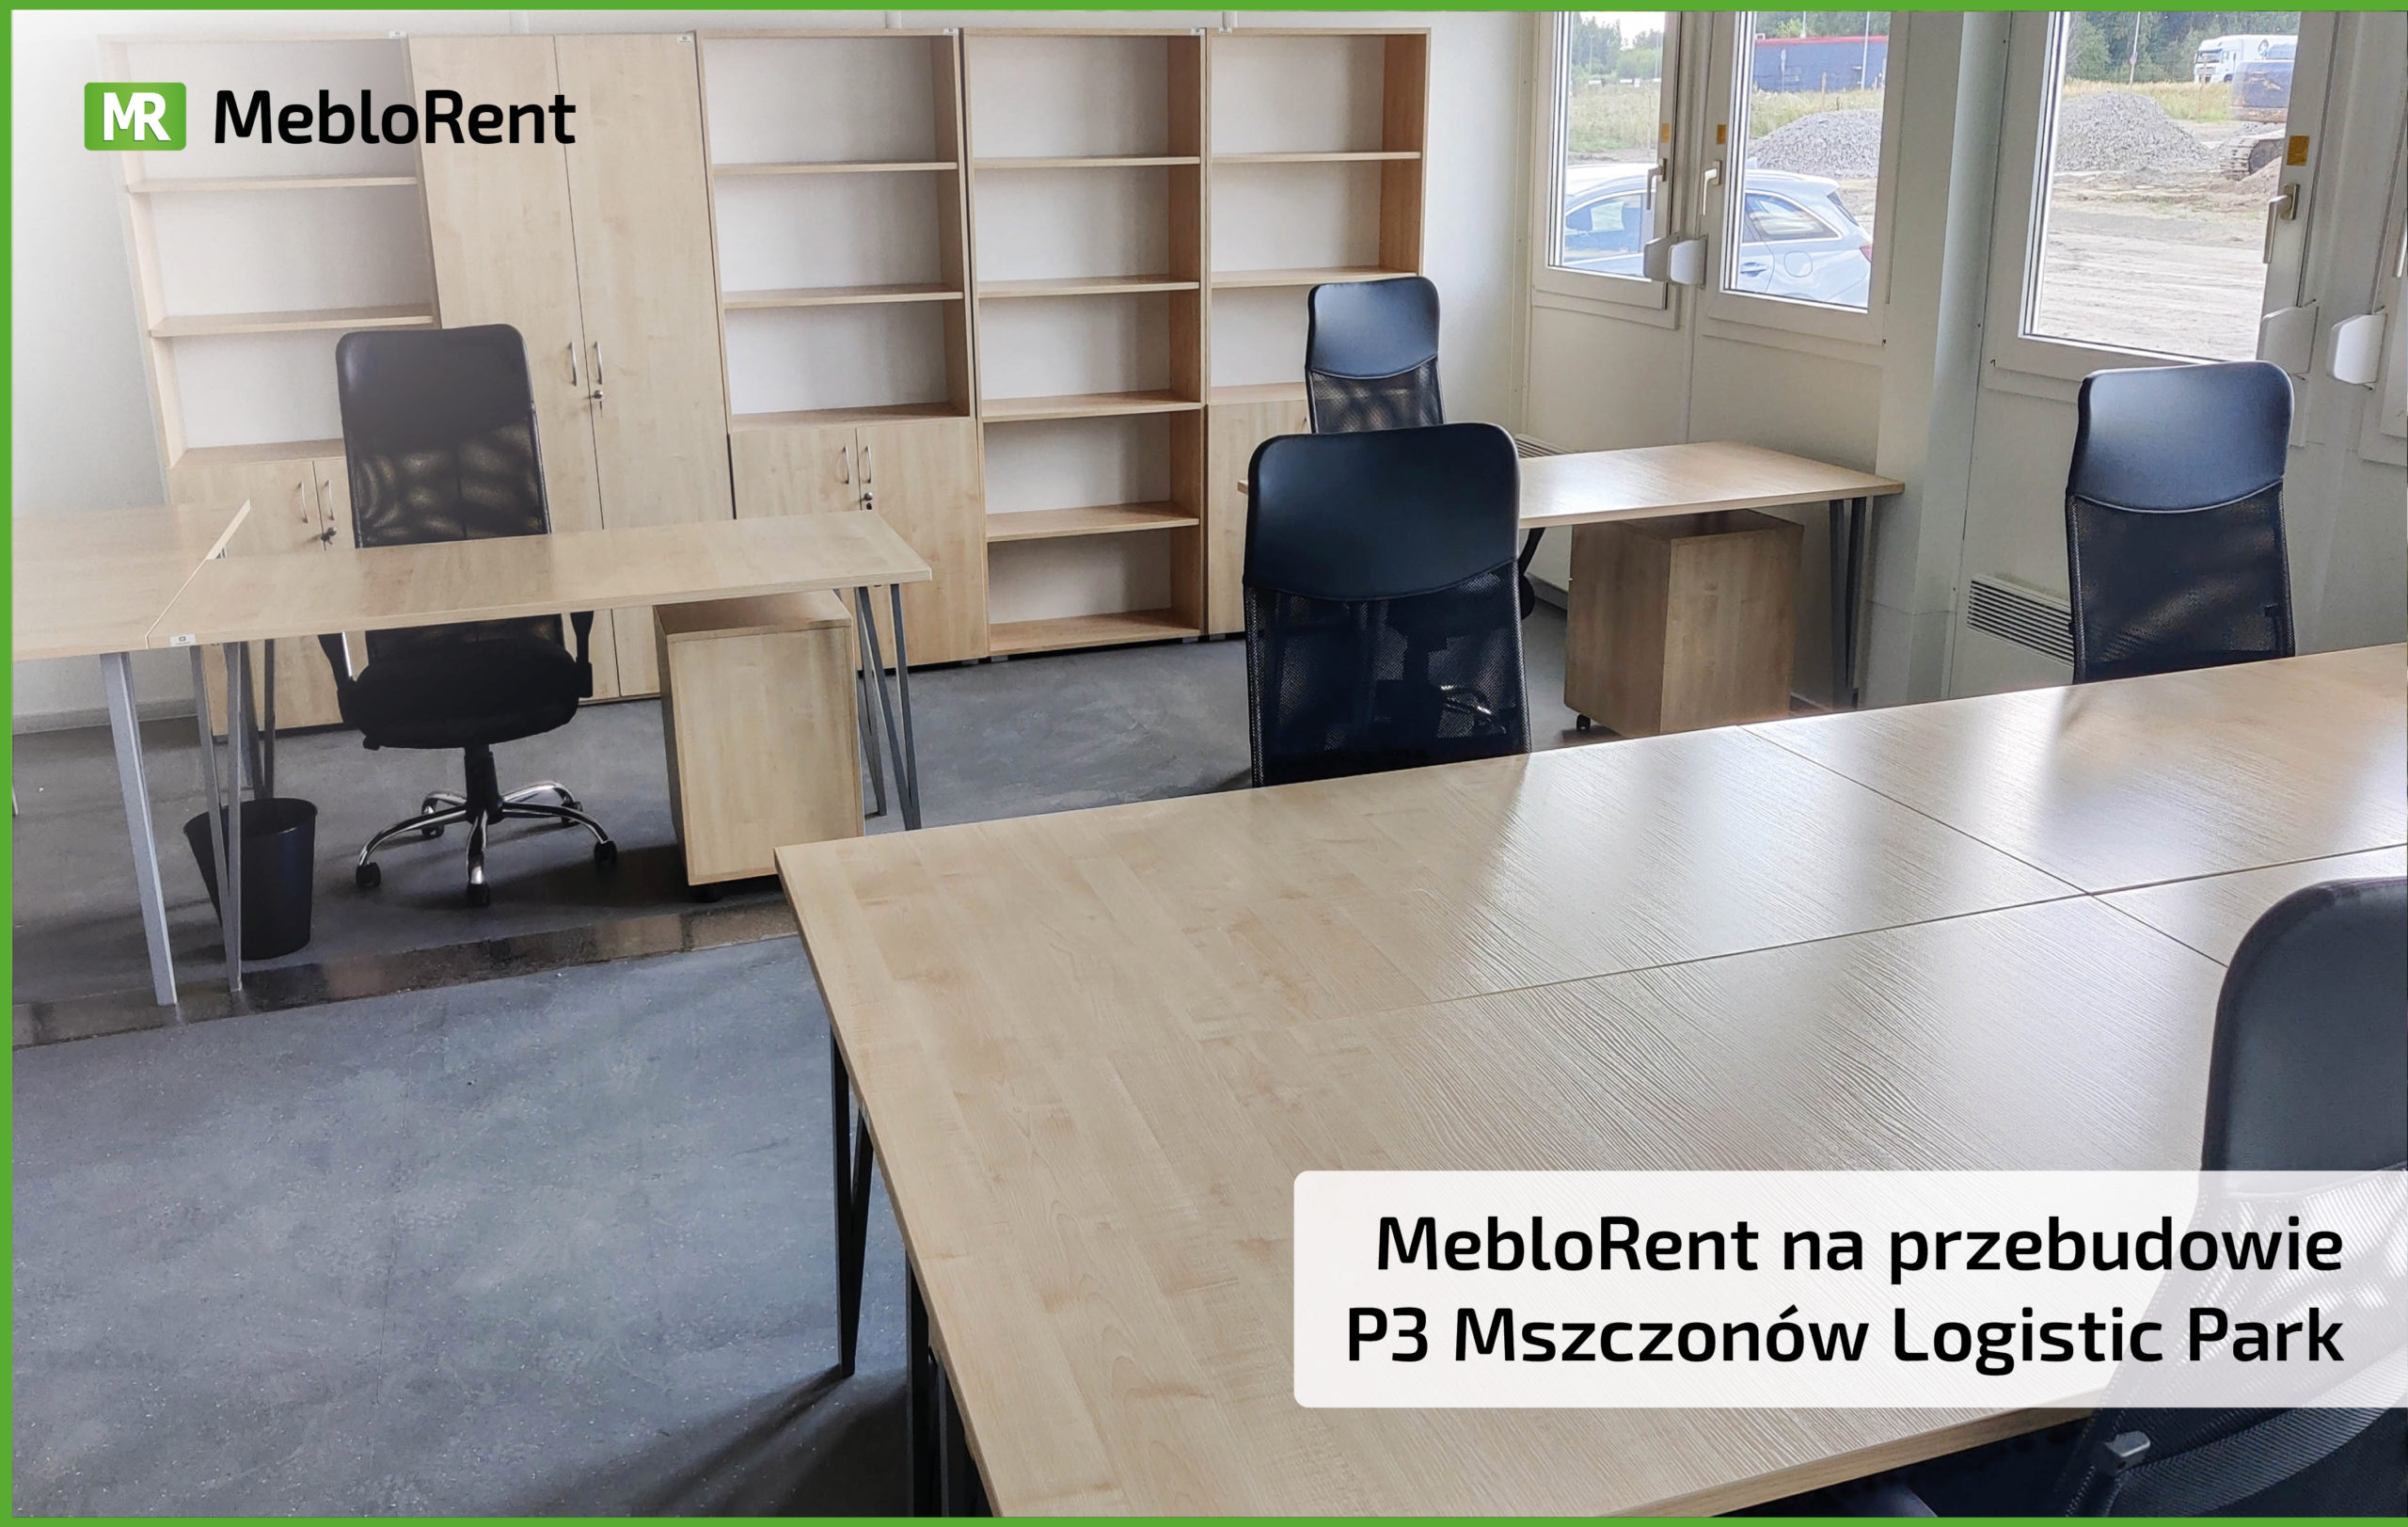 You are currently viewing MebloRent a przebudowie P3 Mszczonów Logistic Park